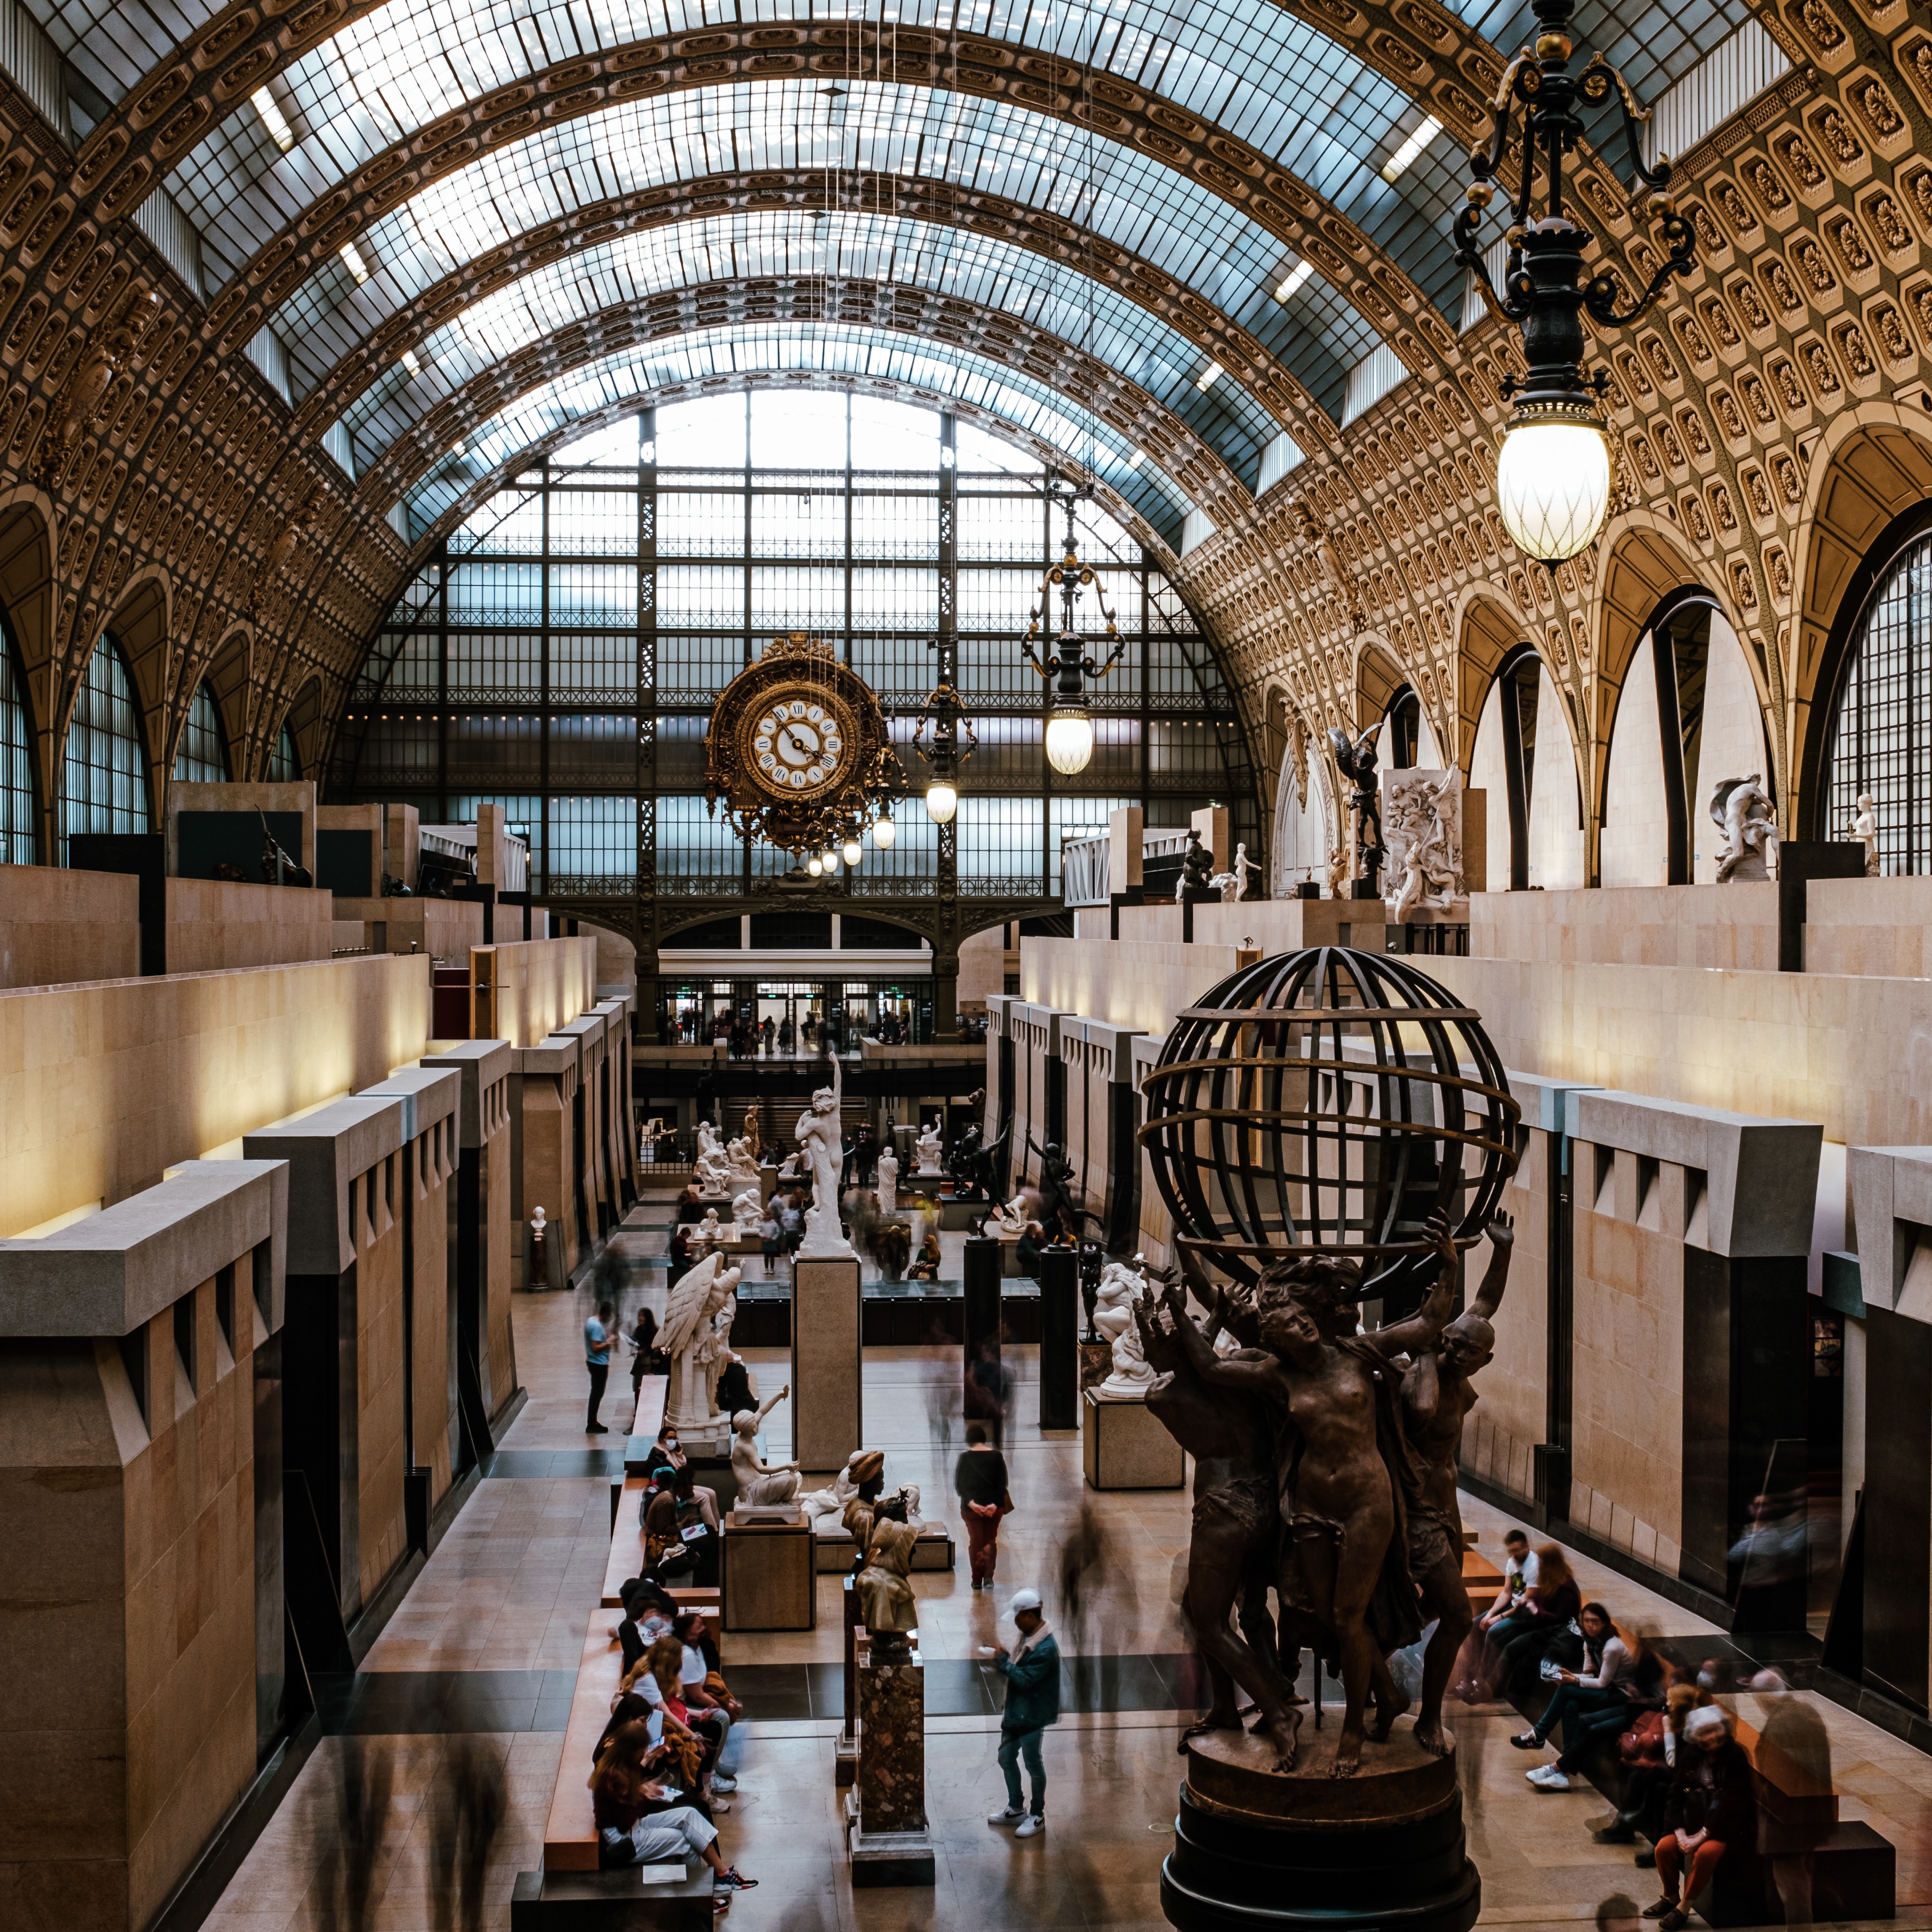 Really appreciated the open space at Musée d'Orsay, and the quiet. 